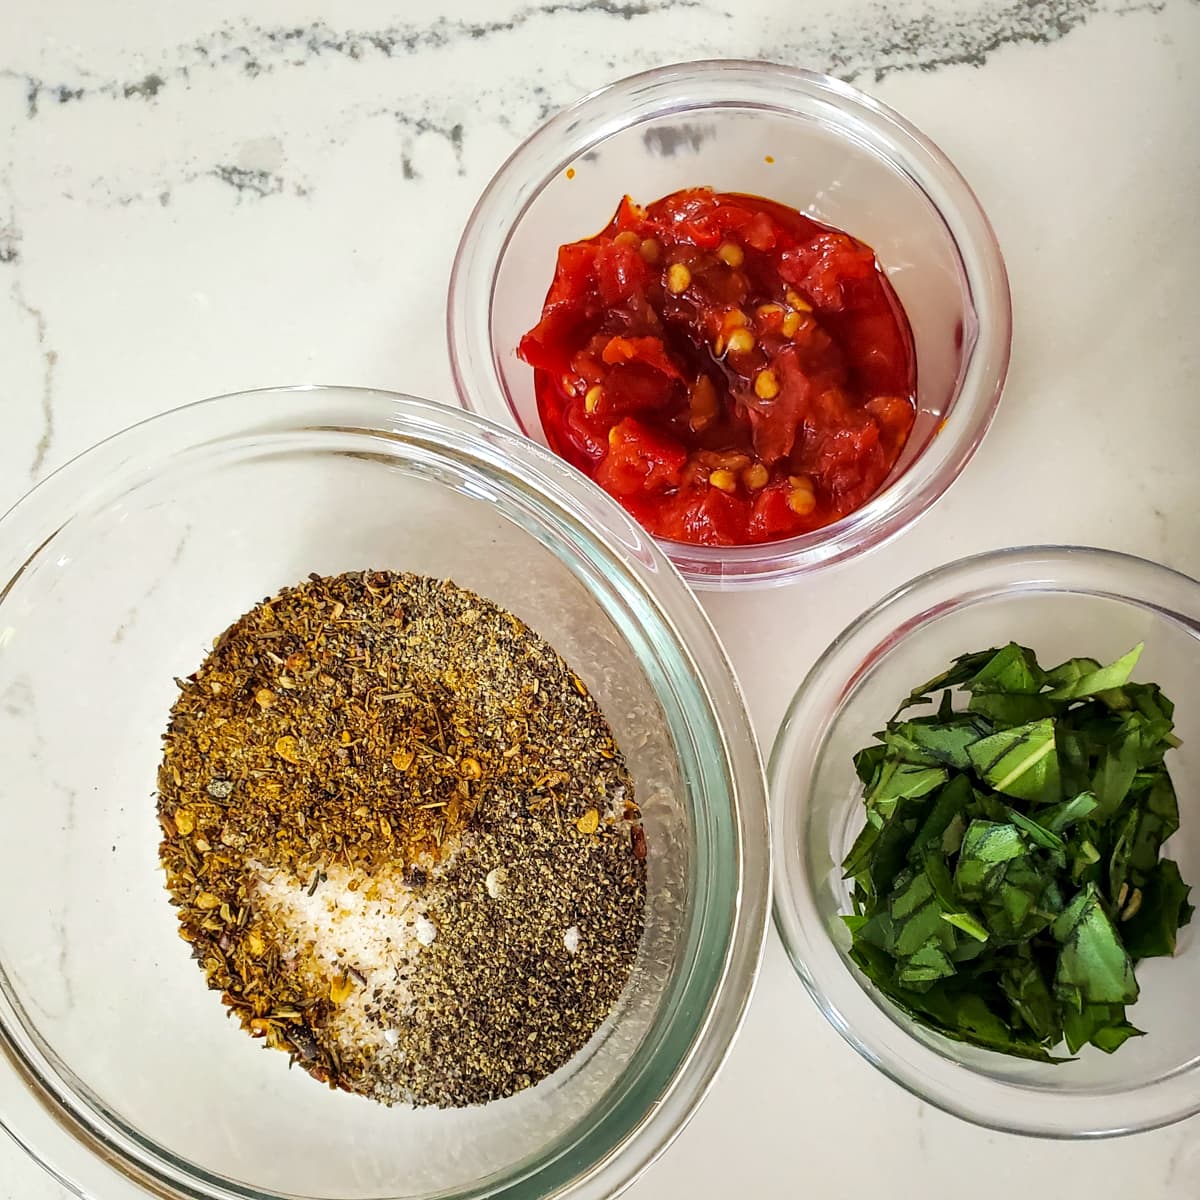 Diced Calabrian chilis, basil, and seasonings and herbs on a counter in small bowls.